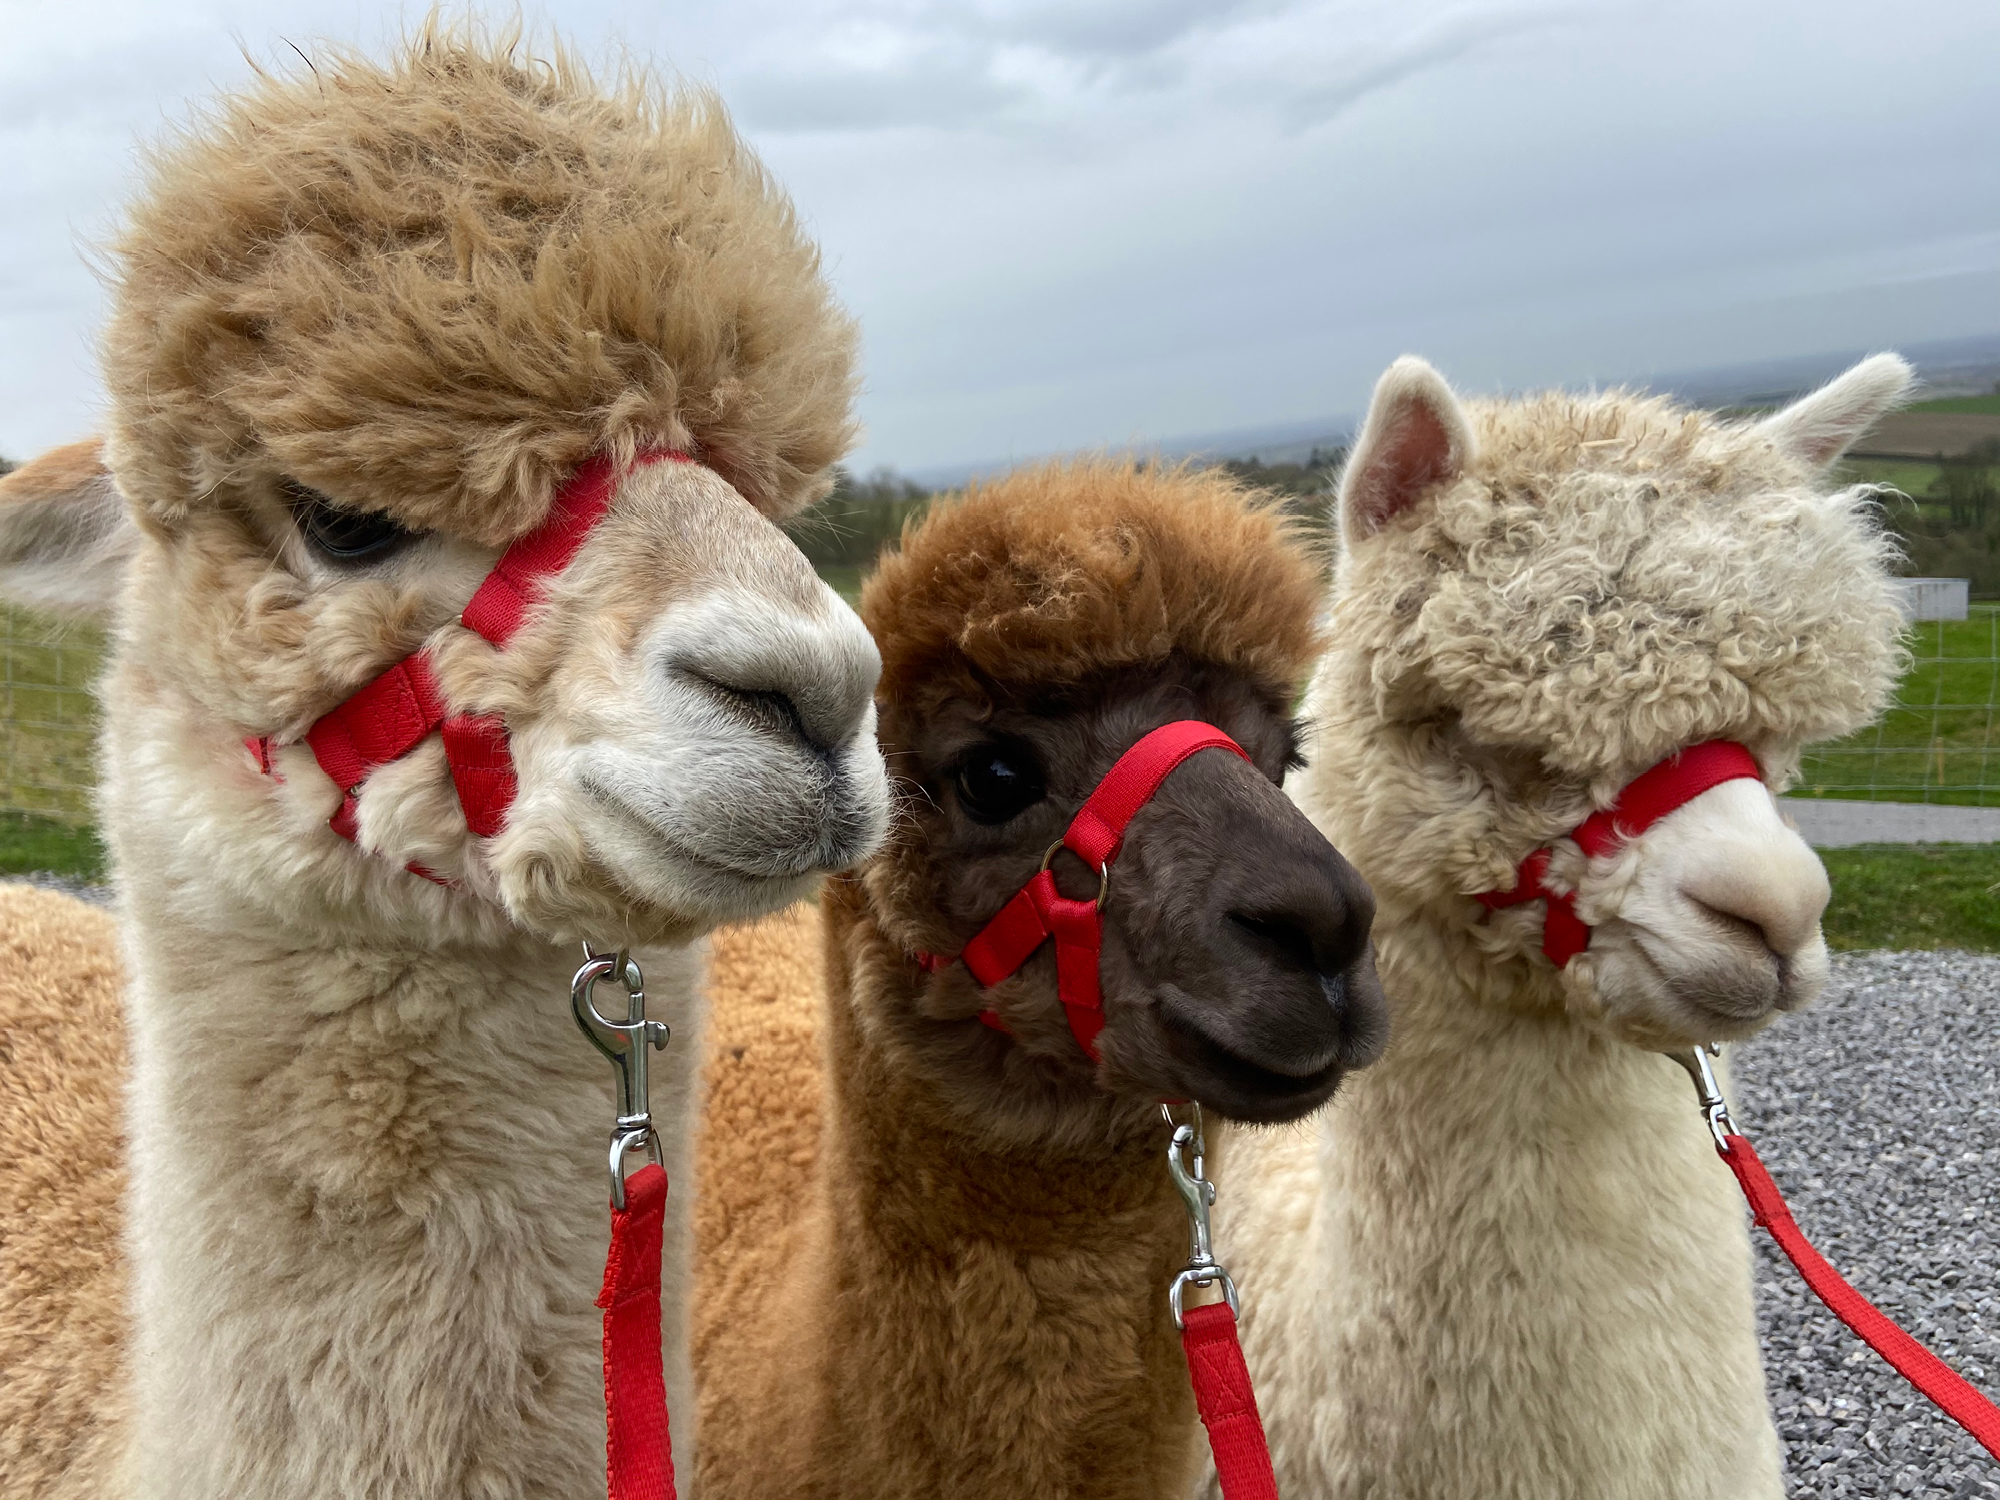 The Private Hill is a farm-free area within the farm, with their kind alpacas roaming around